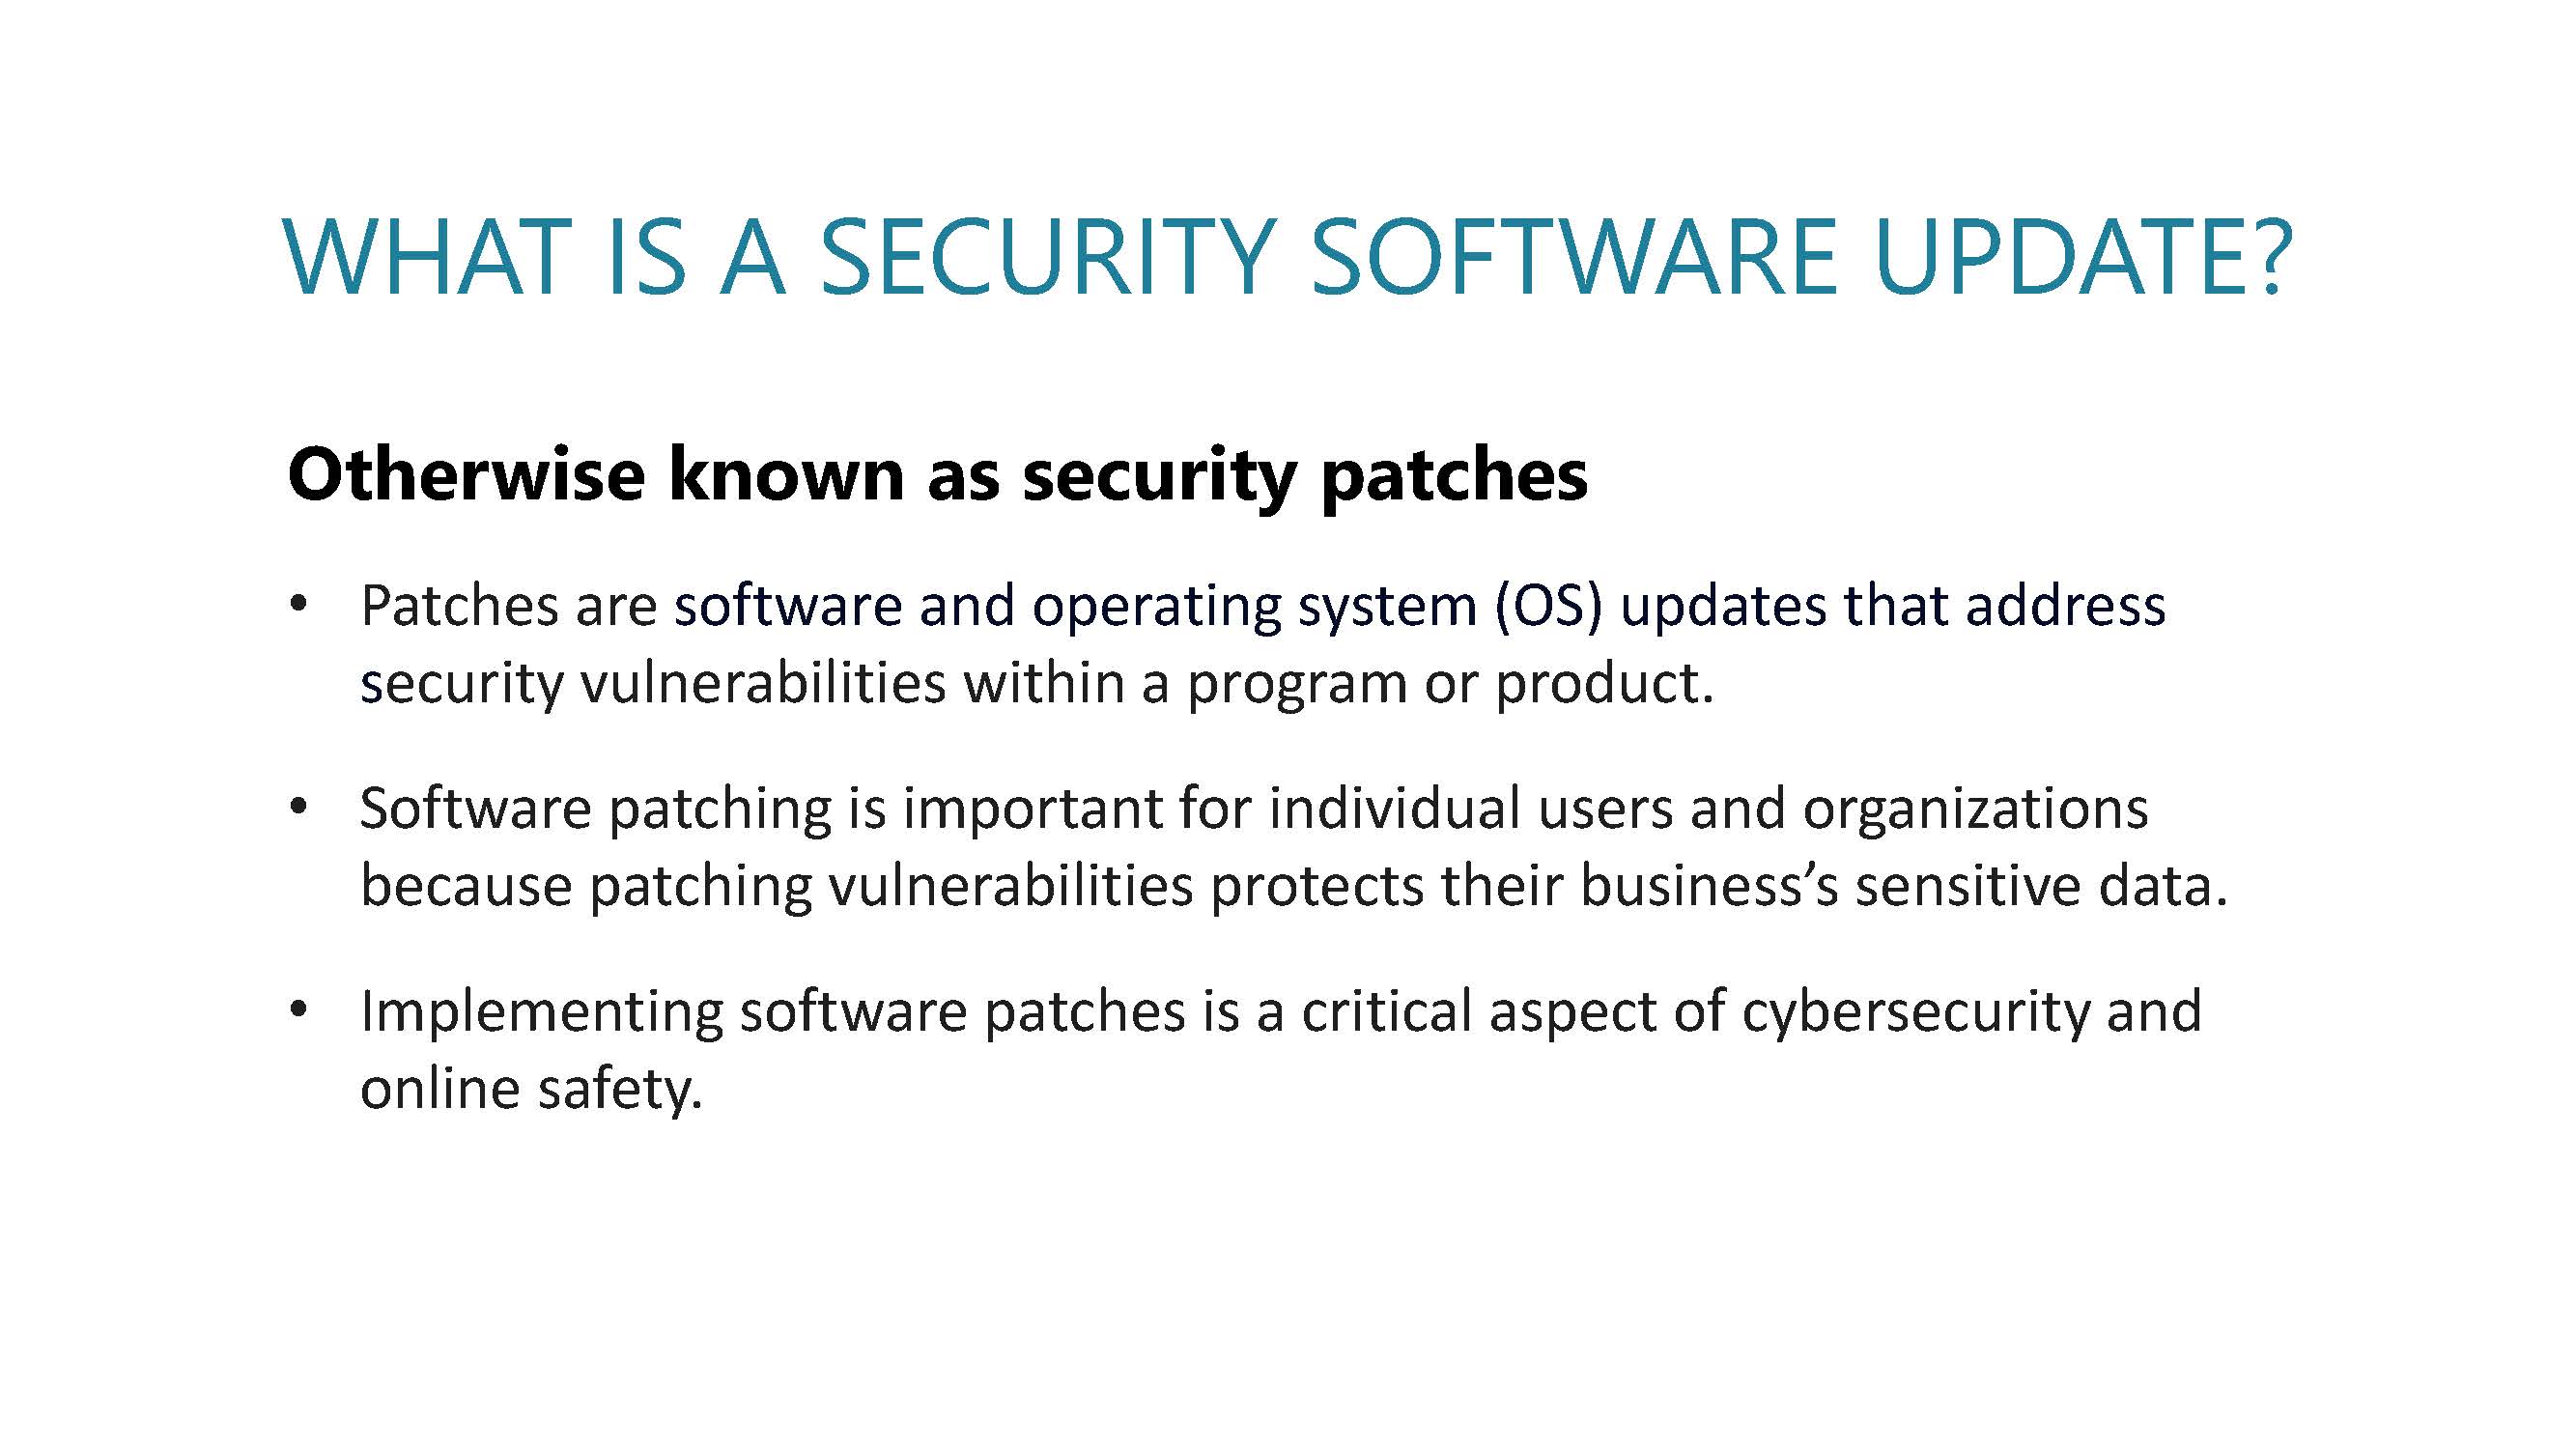 TechTalk_Security in the World today (002)_Page_28.jpg